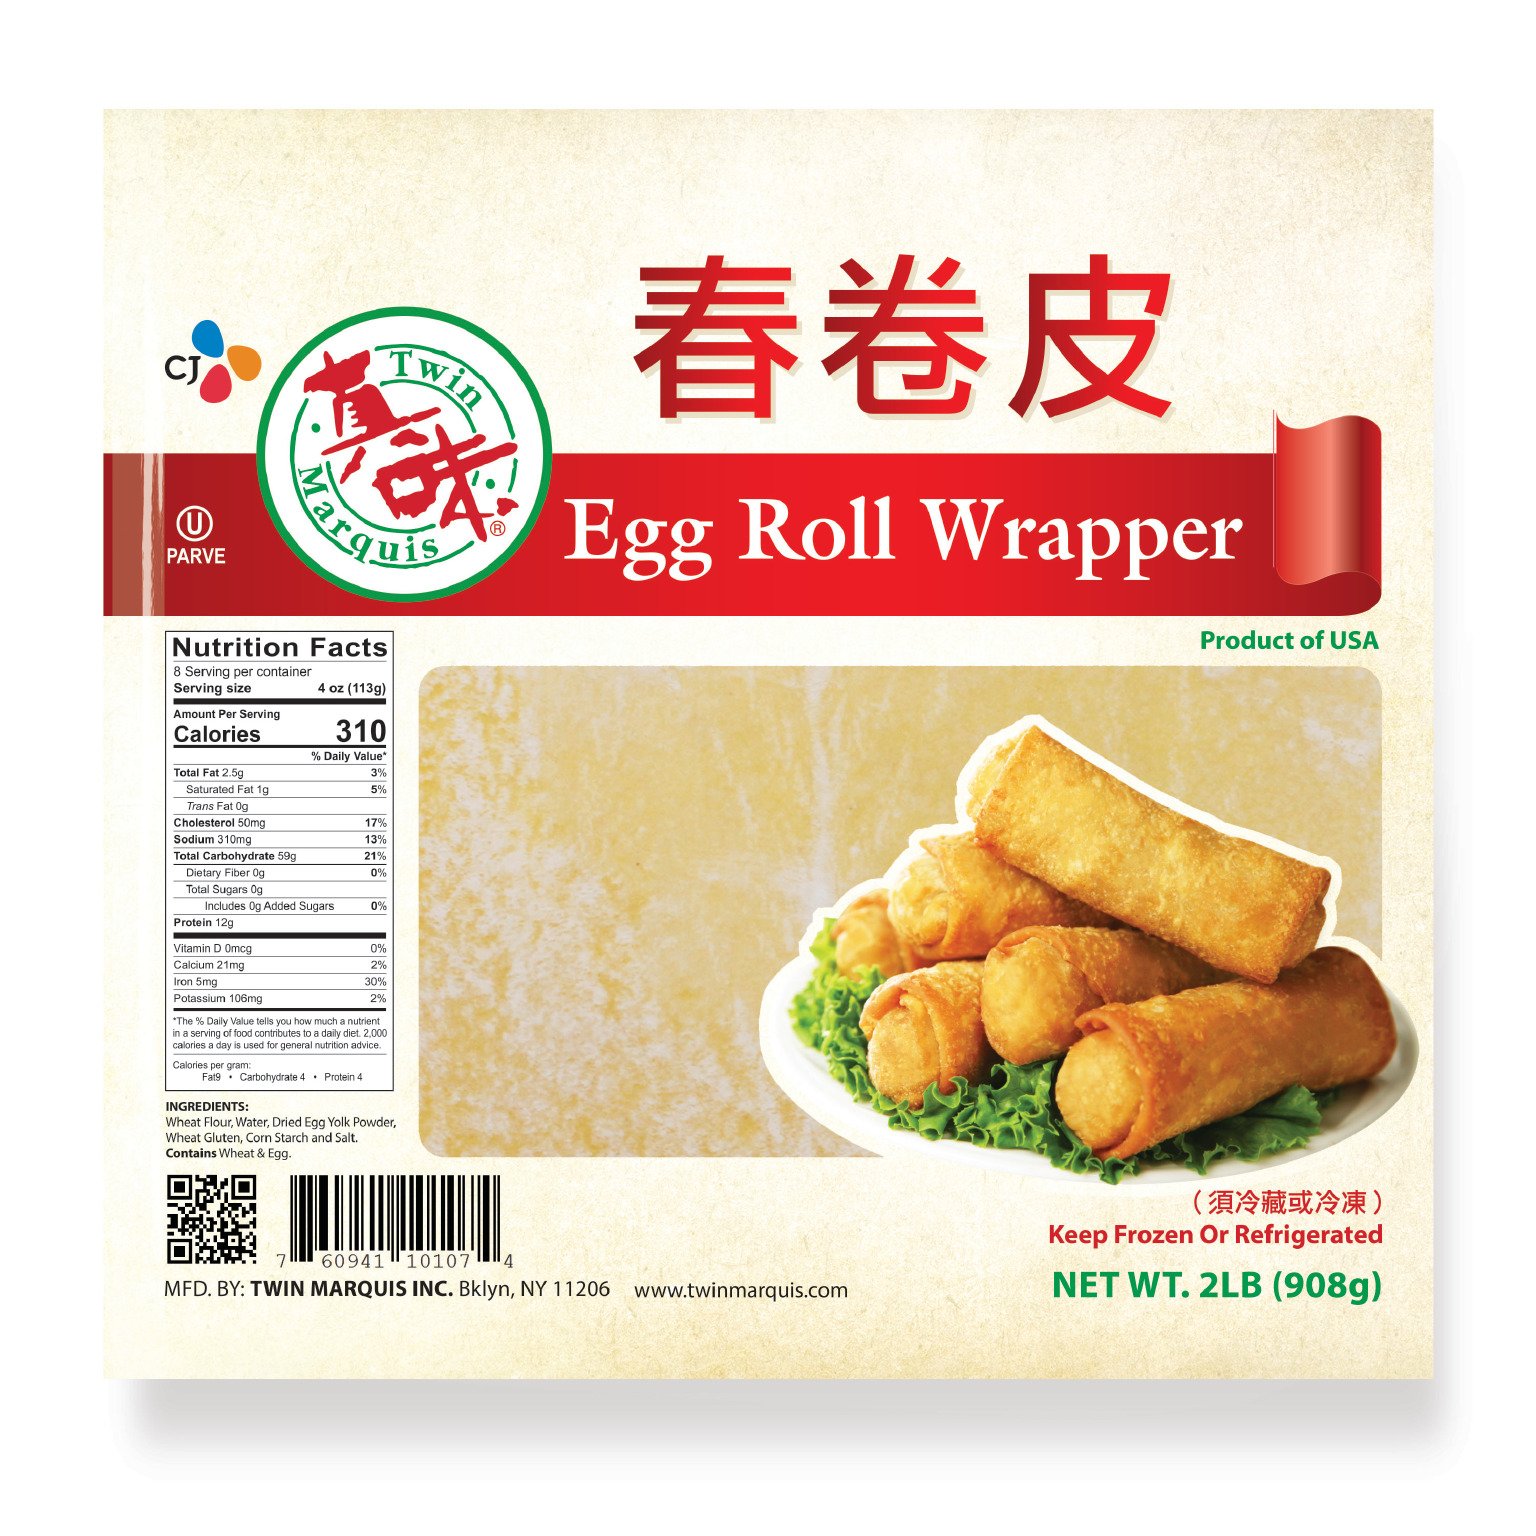 Egg Roll Wraps 12 Ct - GJ Curbside